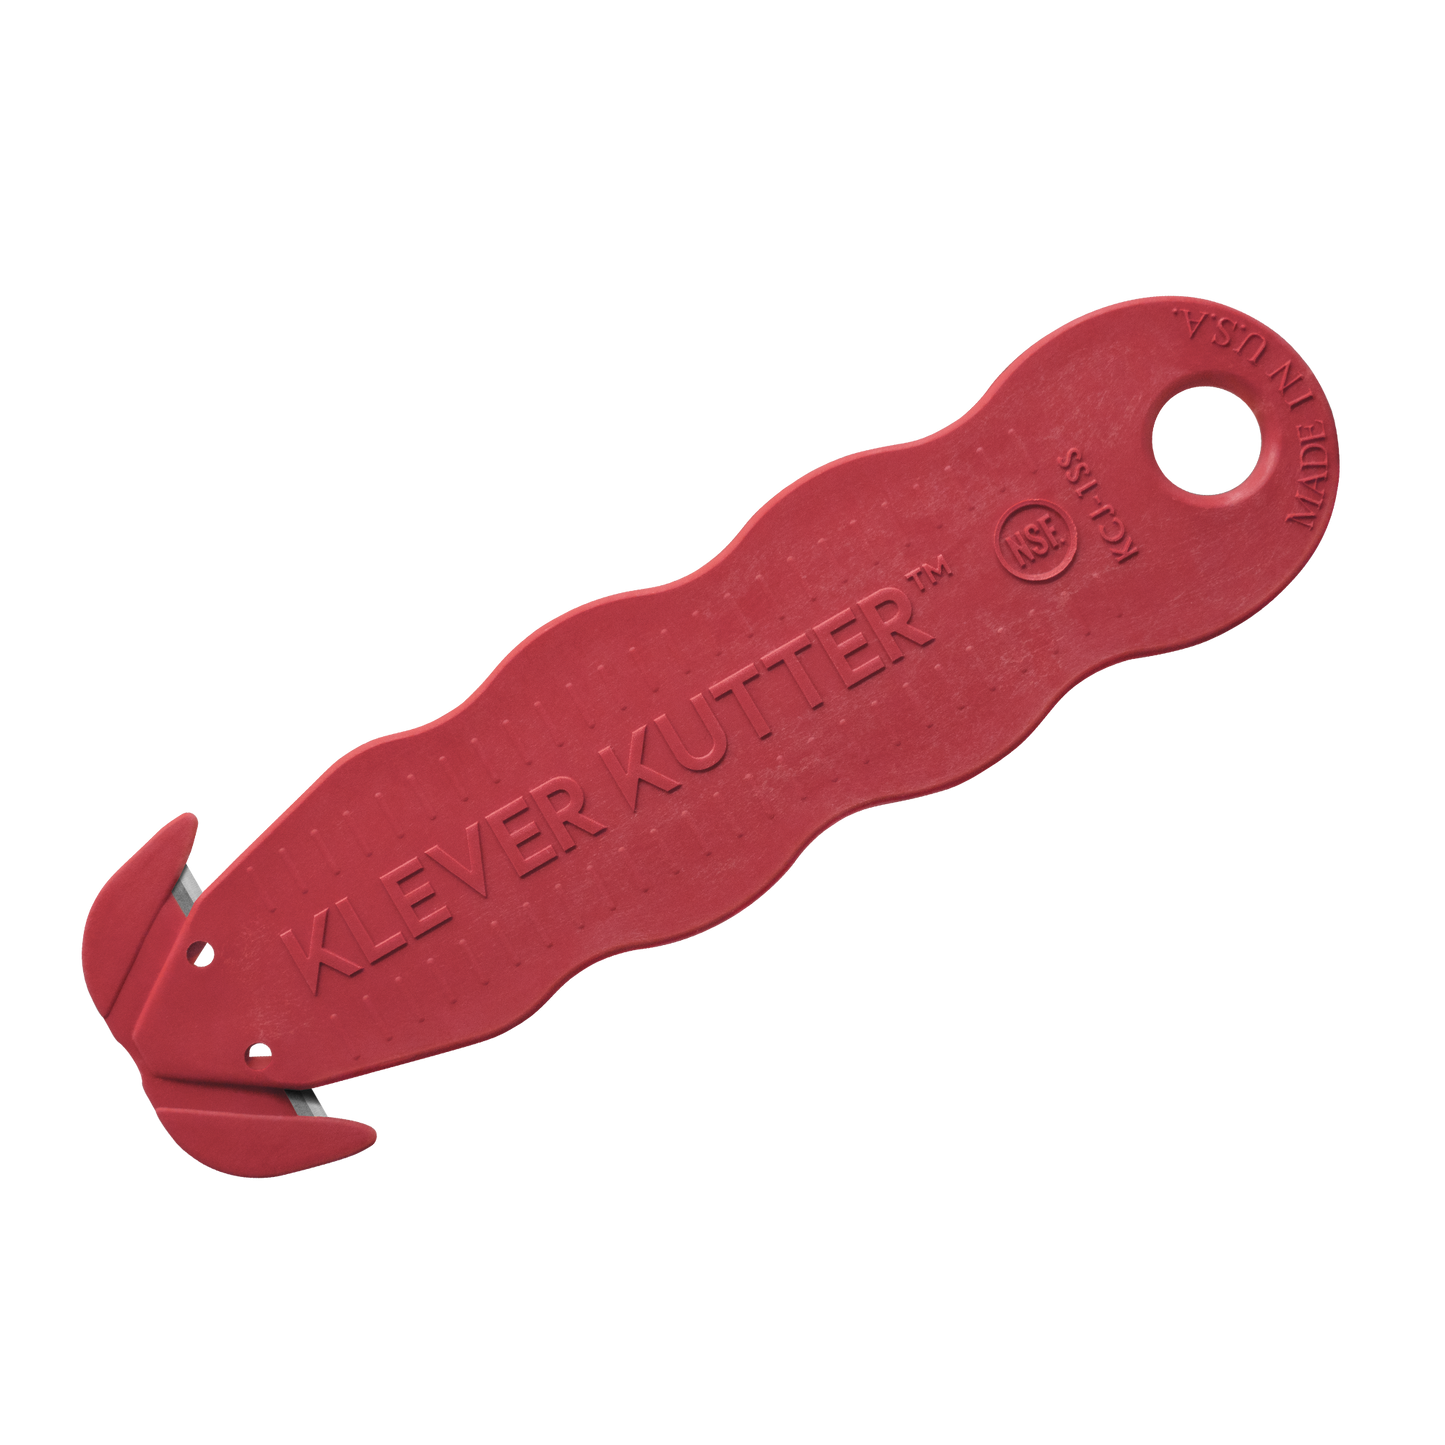 Klever Kutter NSF Food Zone Certified Red Safety Box Cutter KCJ-1SSRX